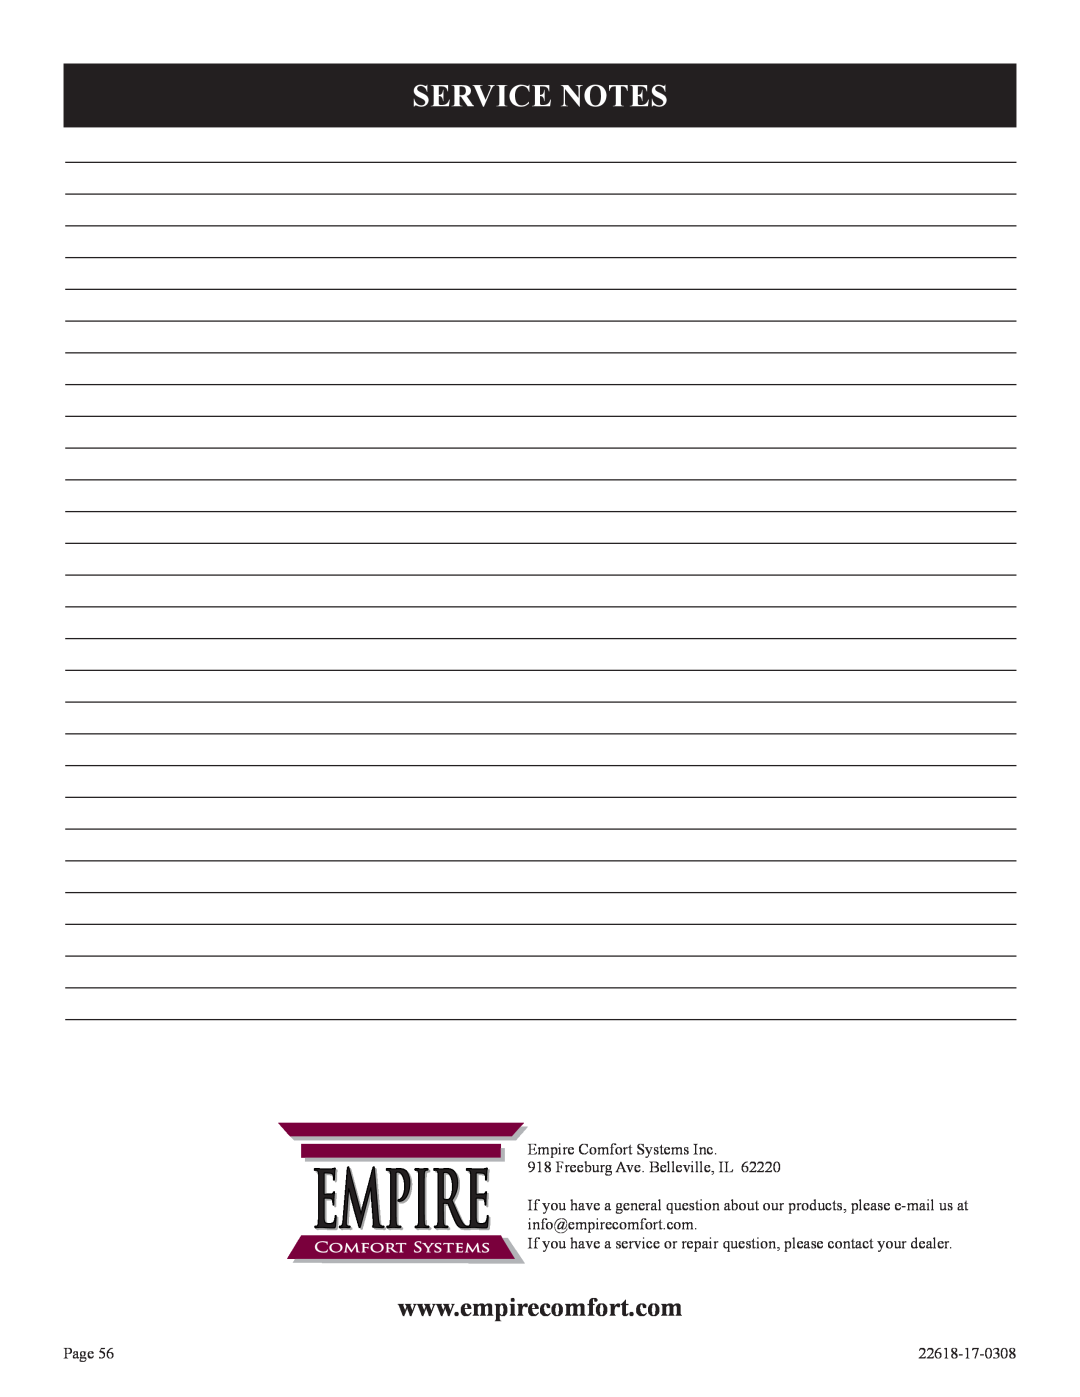 Empire Comfort Systems GN, GP)-1 Service Notes, Empire Comfort Systems Inc, EMPIRE 918 Freeburg Ave. Belleville, IL, Page 